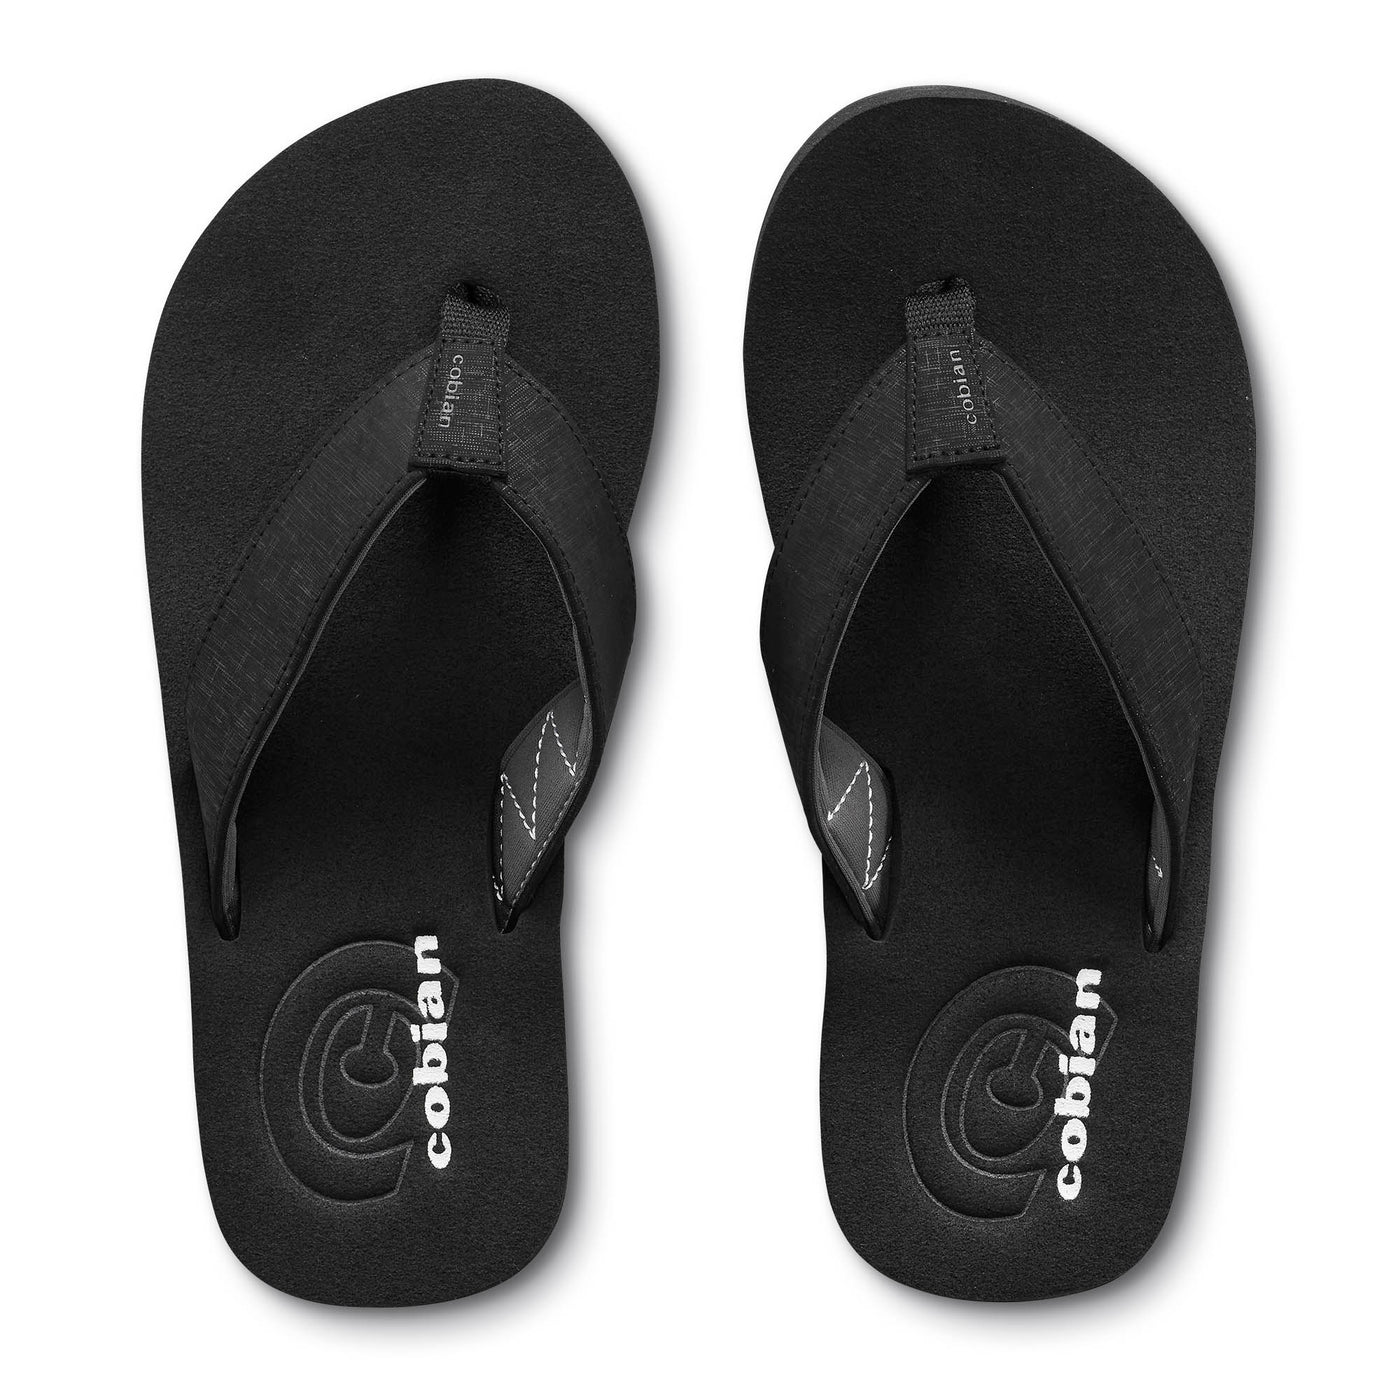 Floater 2™ by Cobian® | Mens Sandals With Arch Support